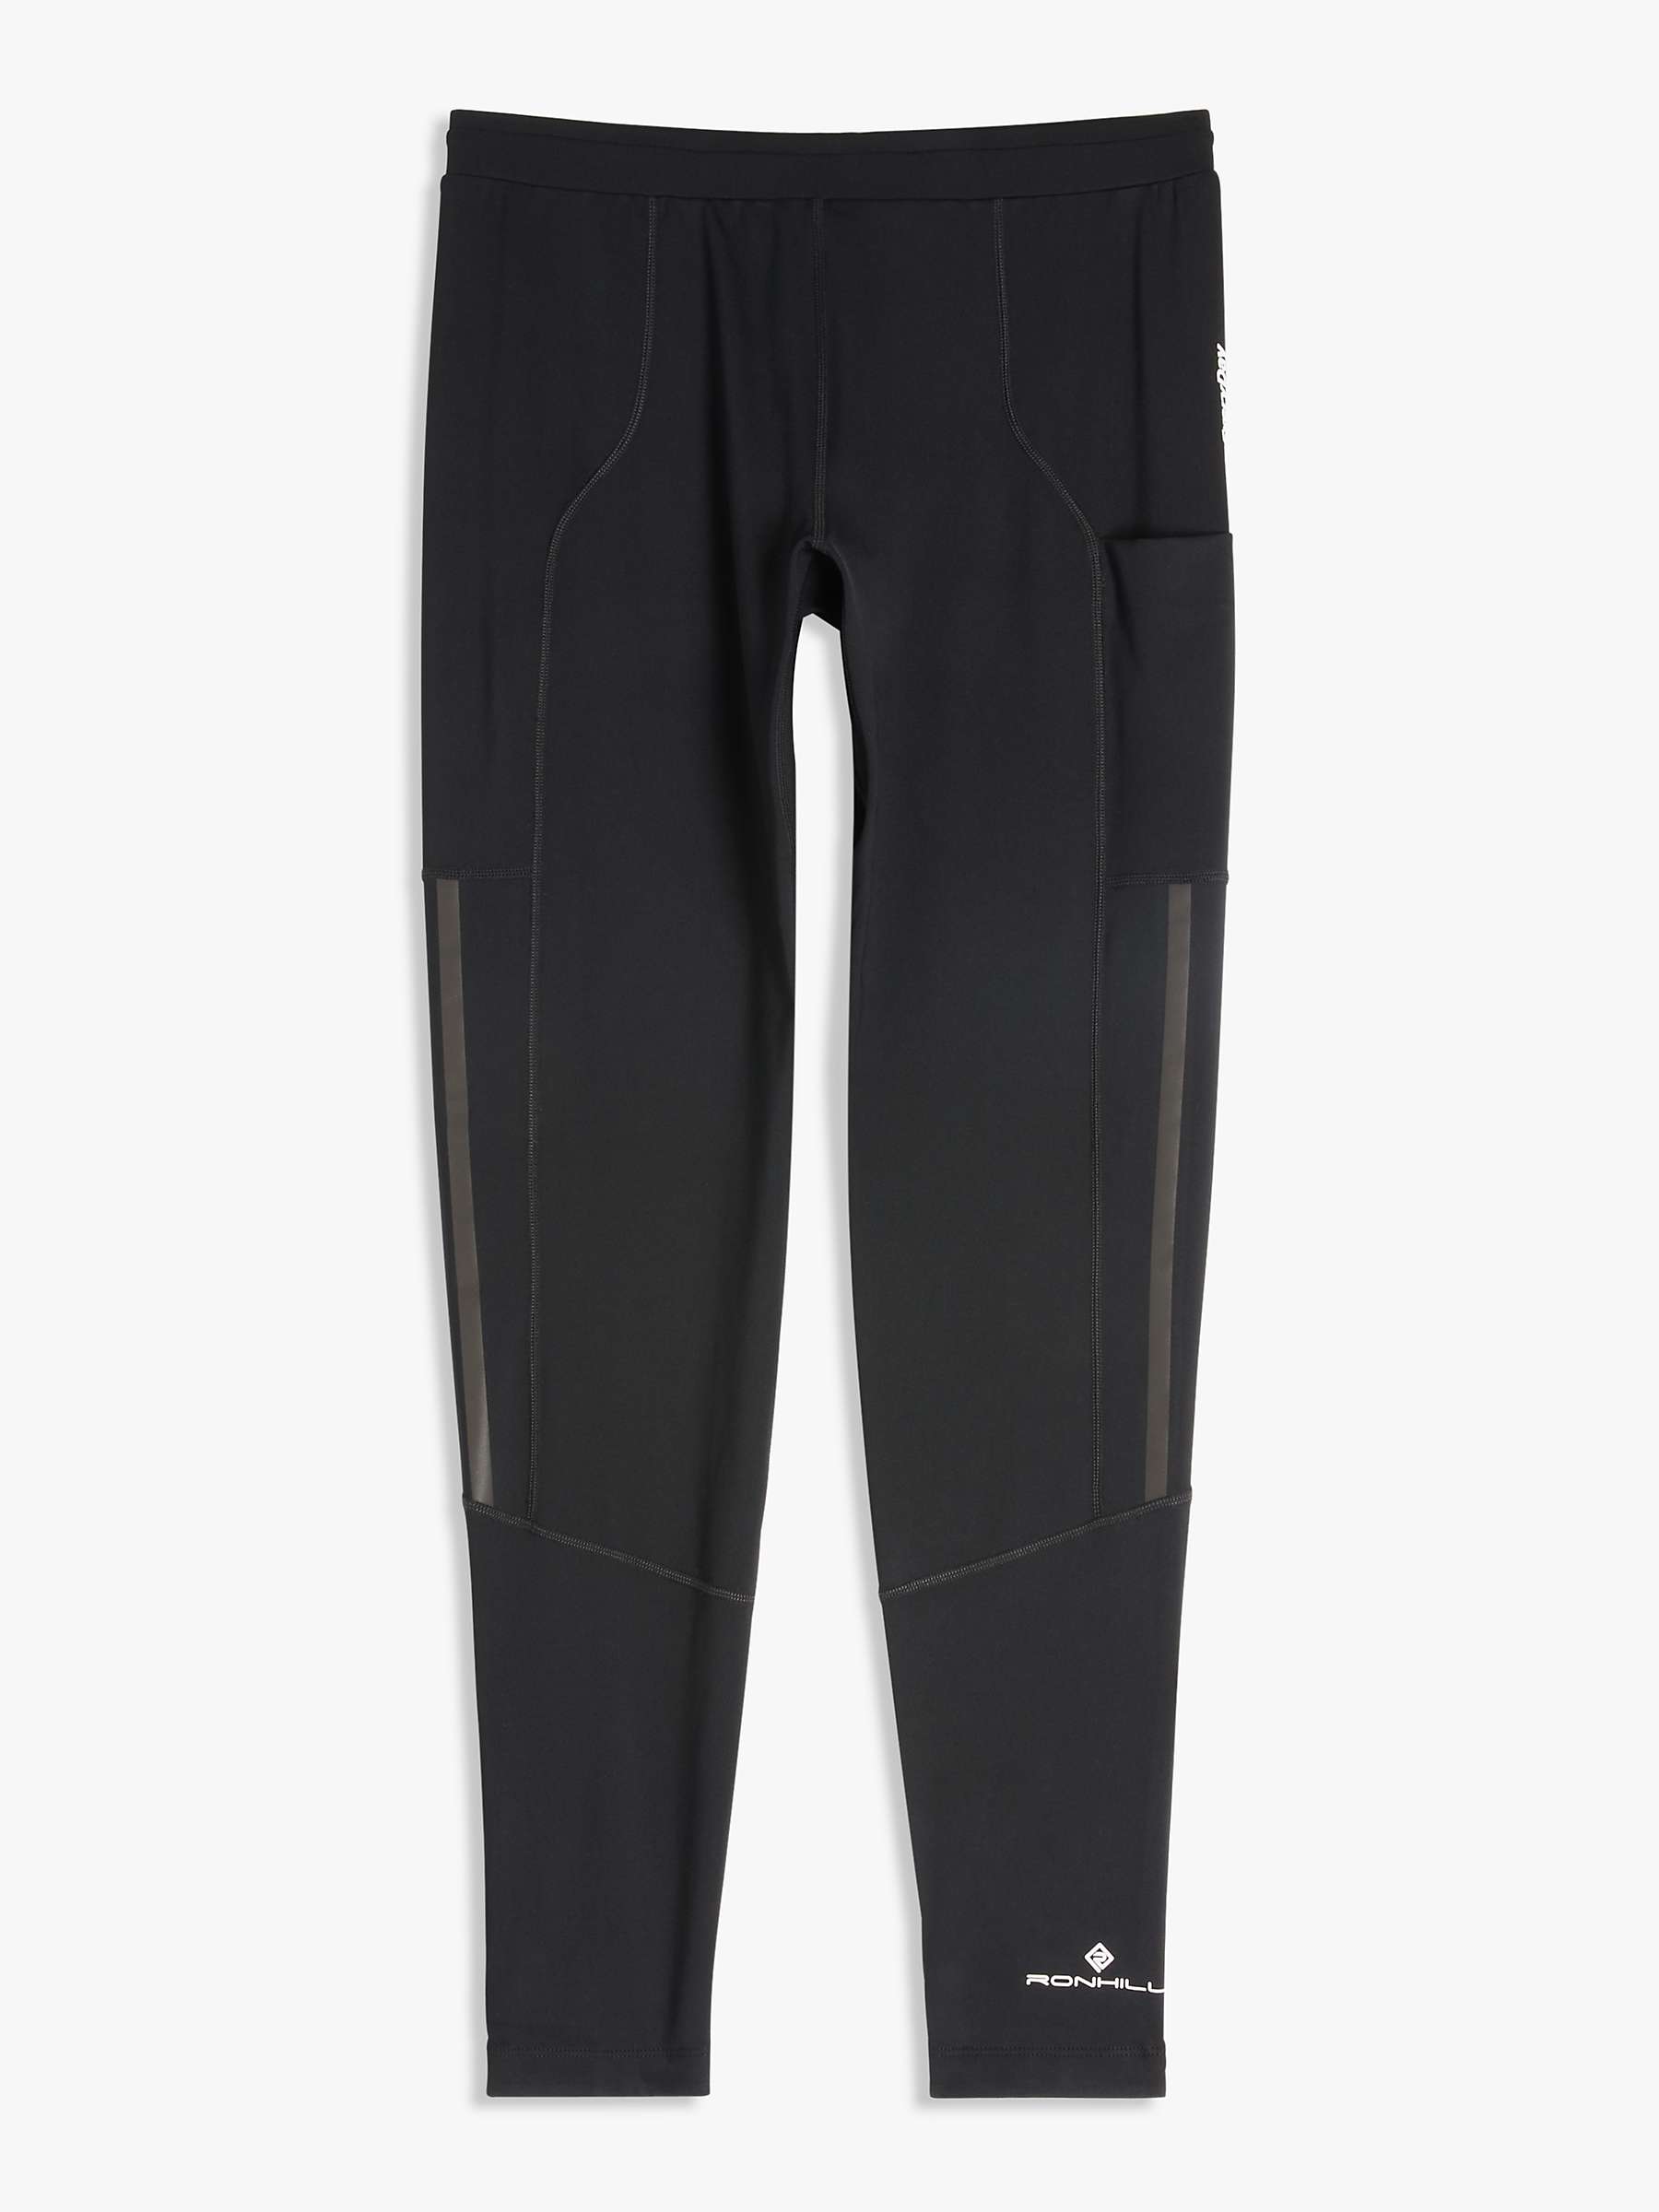 Buy Ronhill Tech Revive Stretch Running Leggings Online at johnlewis.com